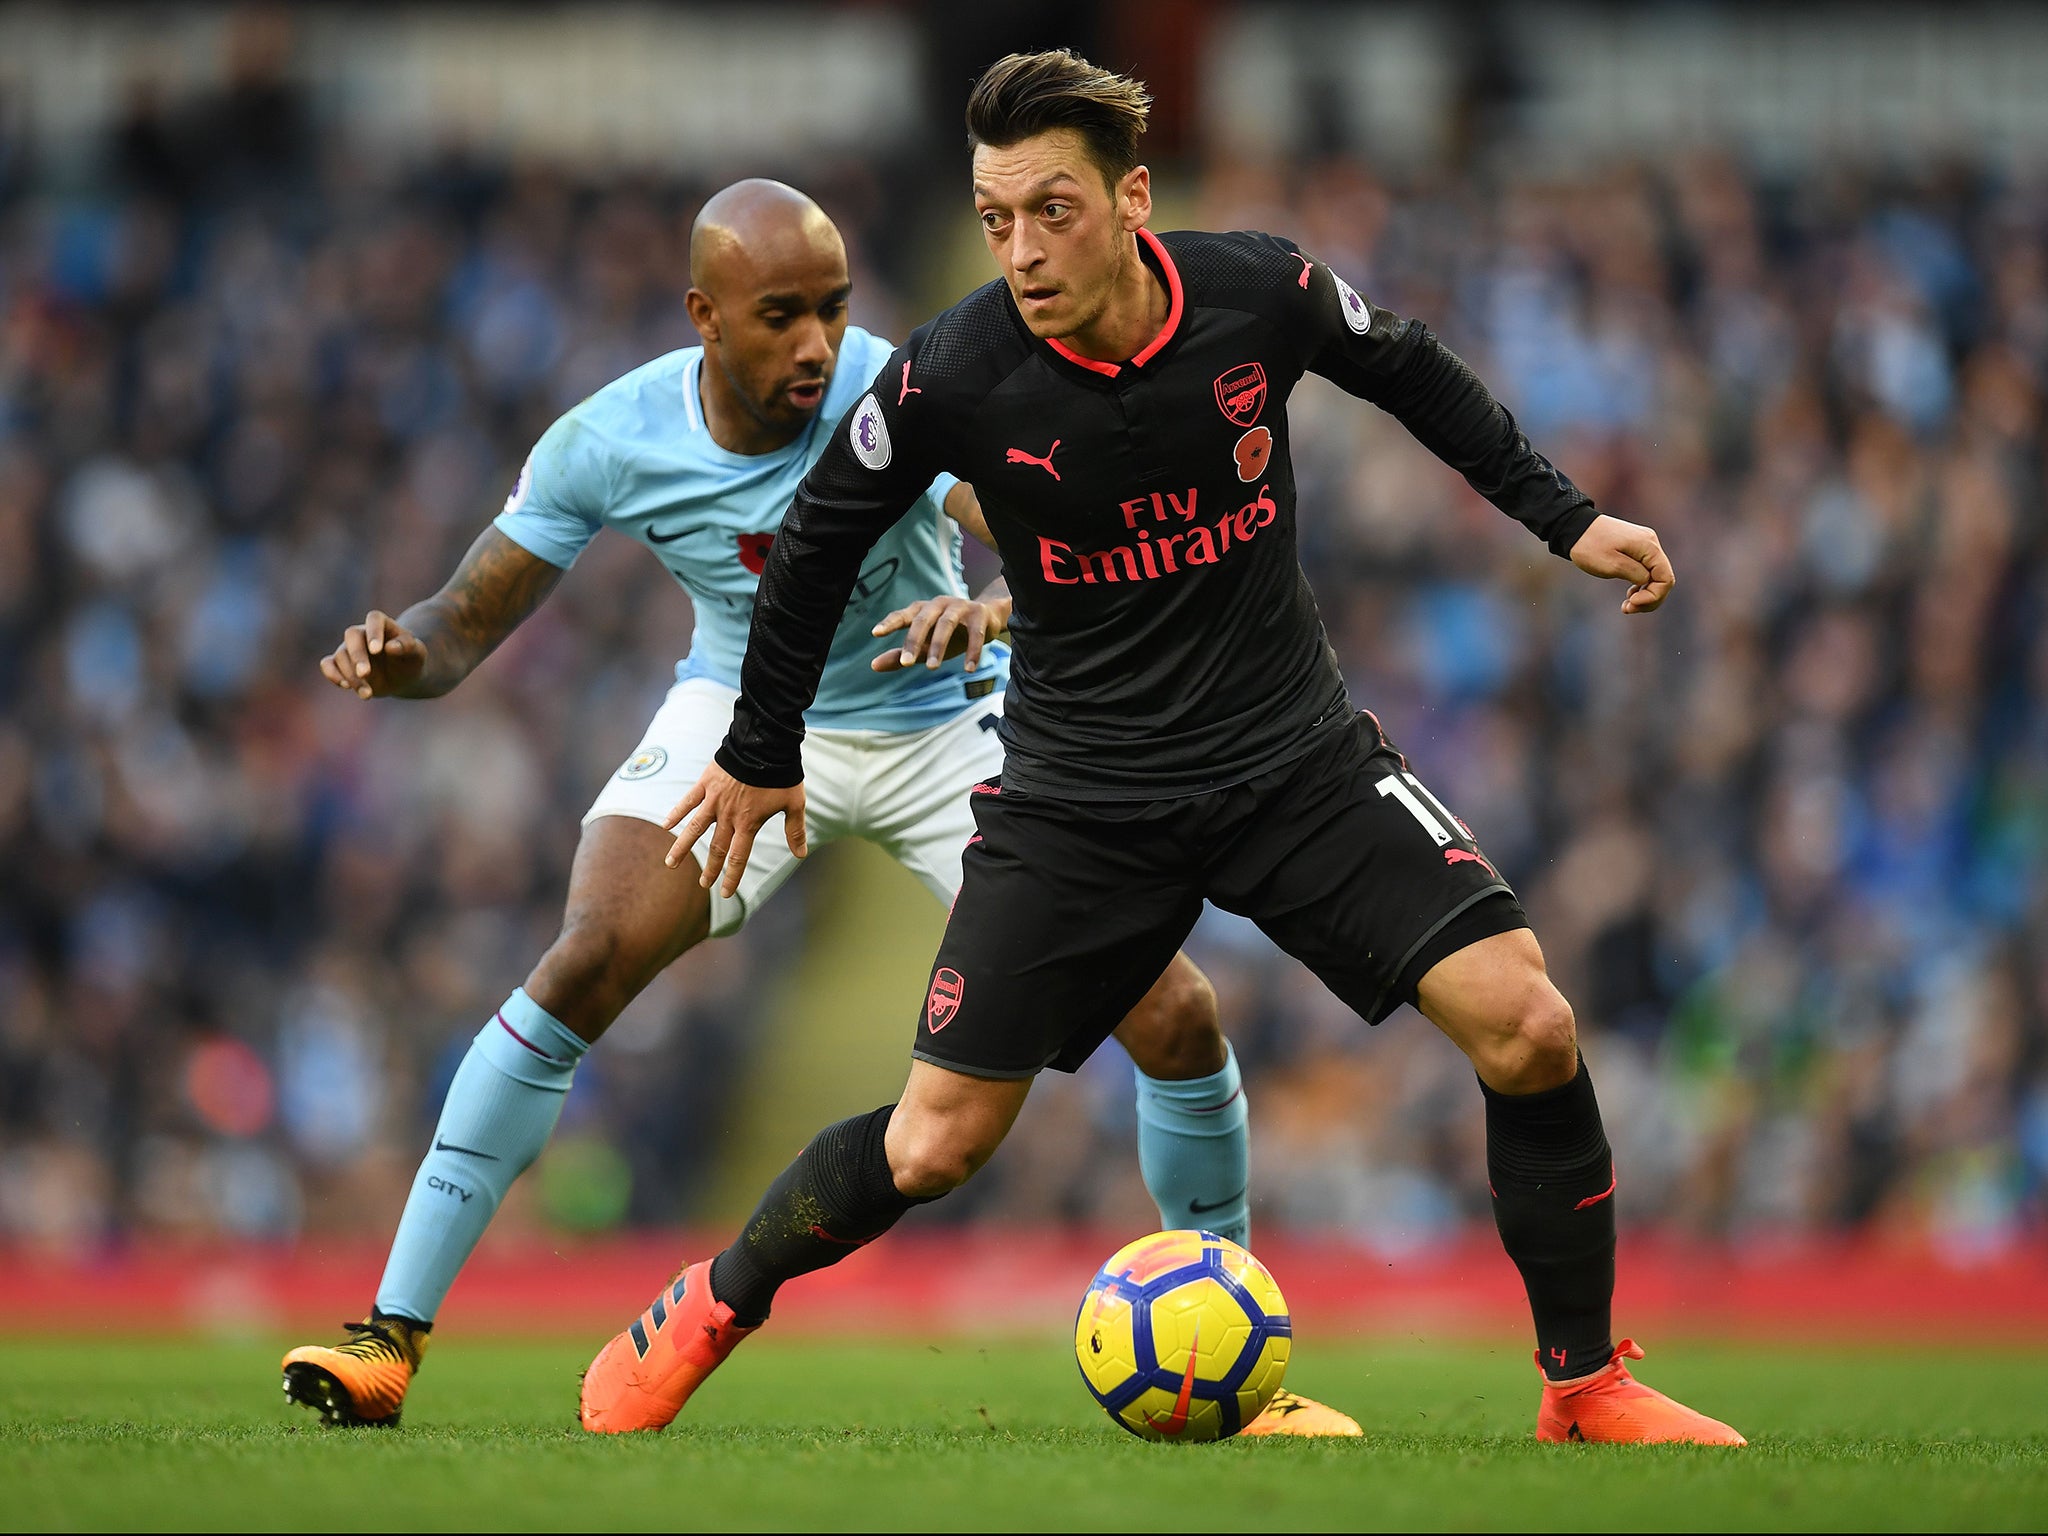 Contract talks between Arsenal and Mesut Ozil are at an impasse